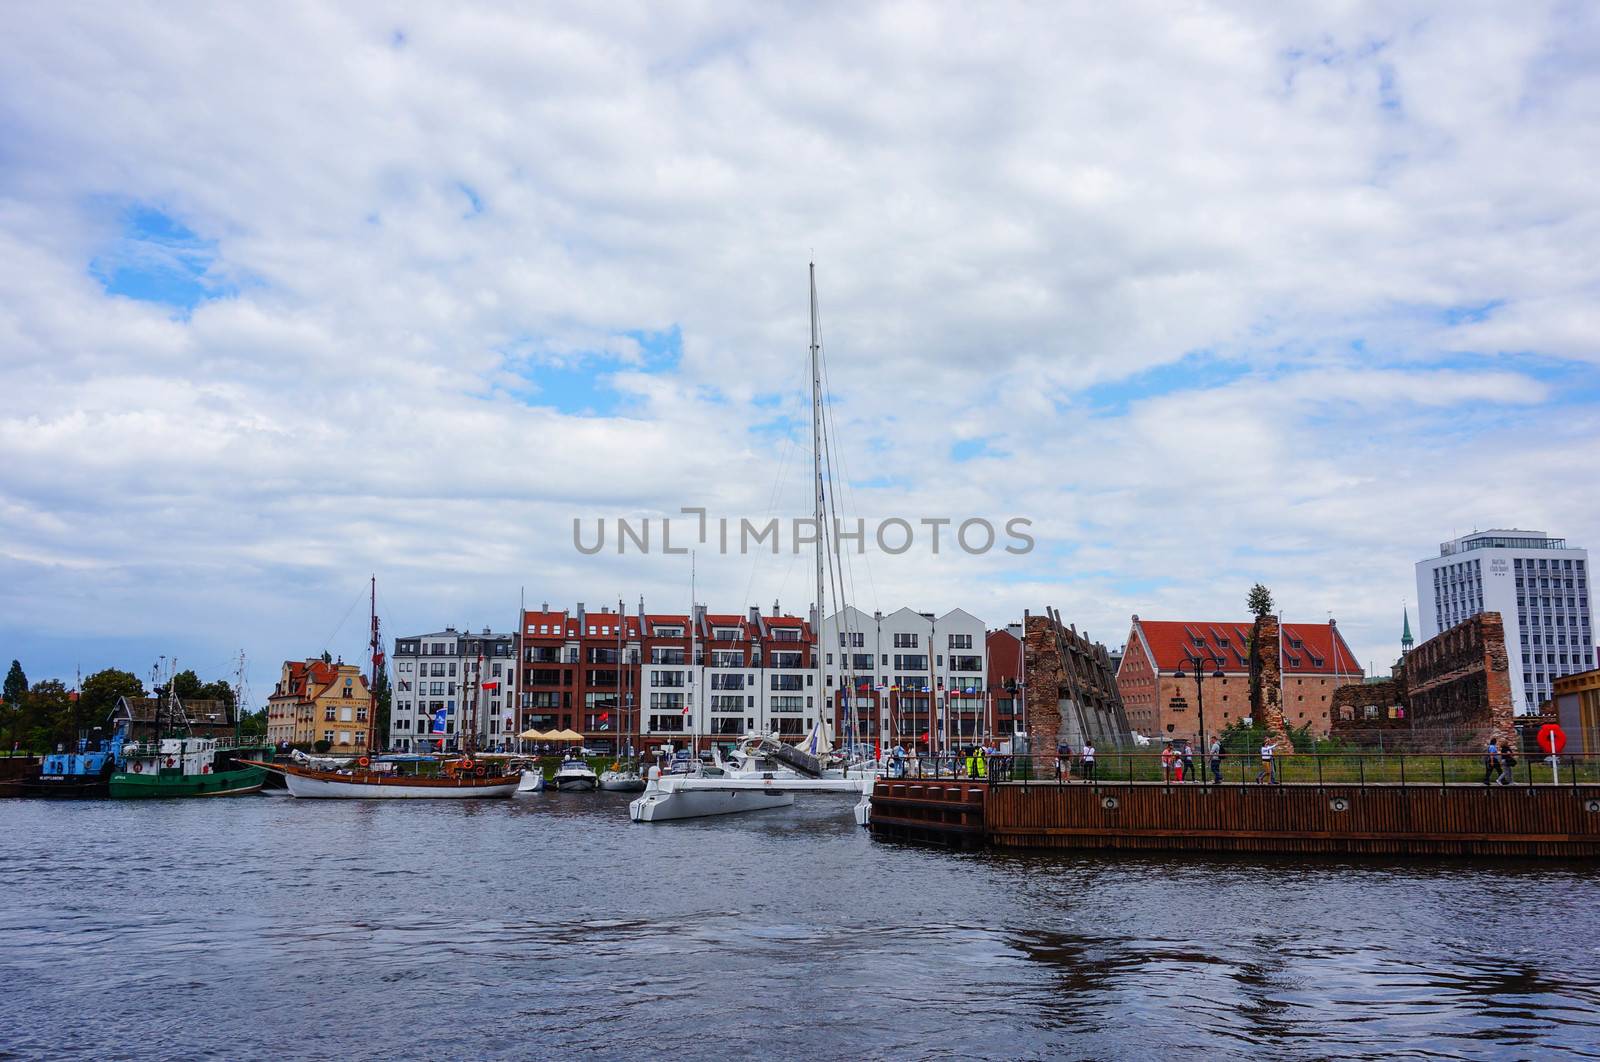 GDANSK, POLAND - JULY 29, 2015: Building by the Motlawa river at the city center